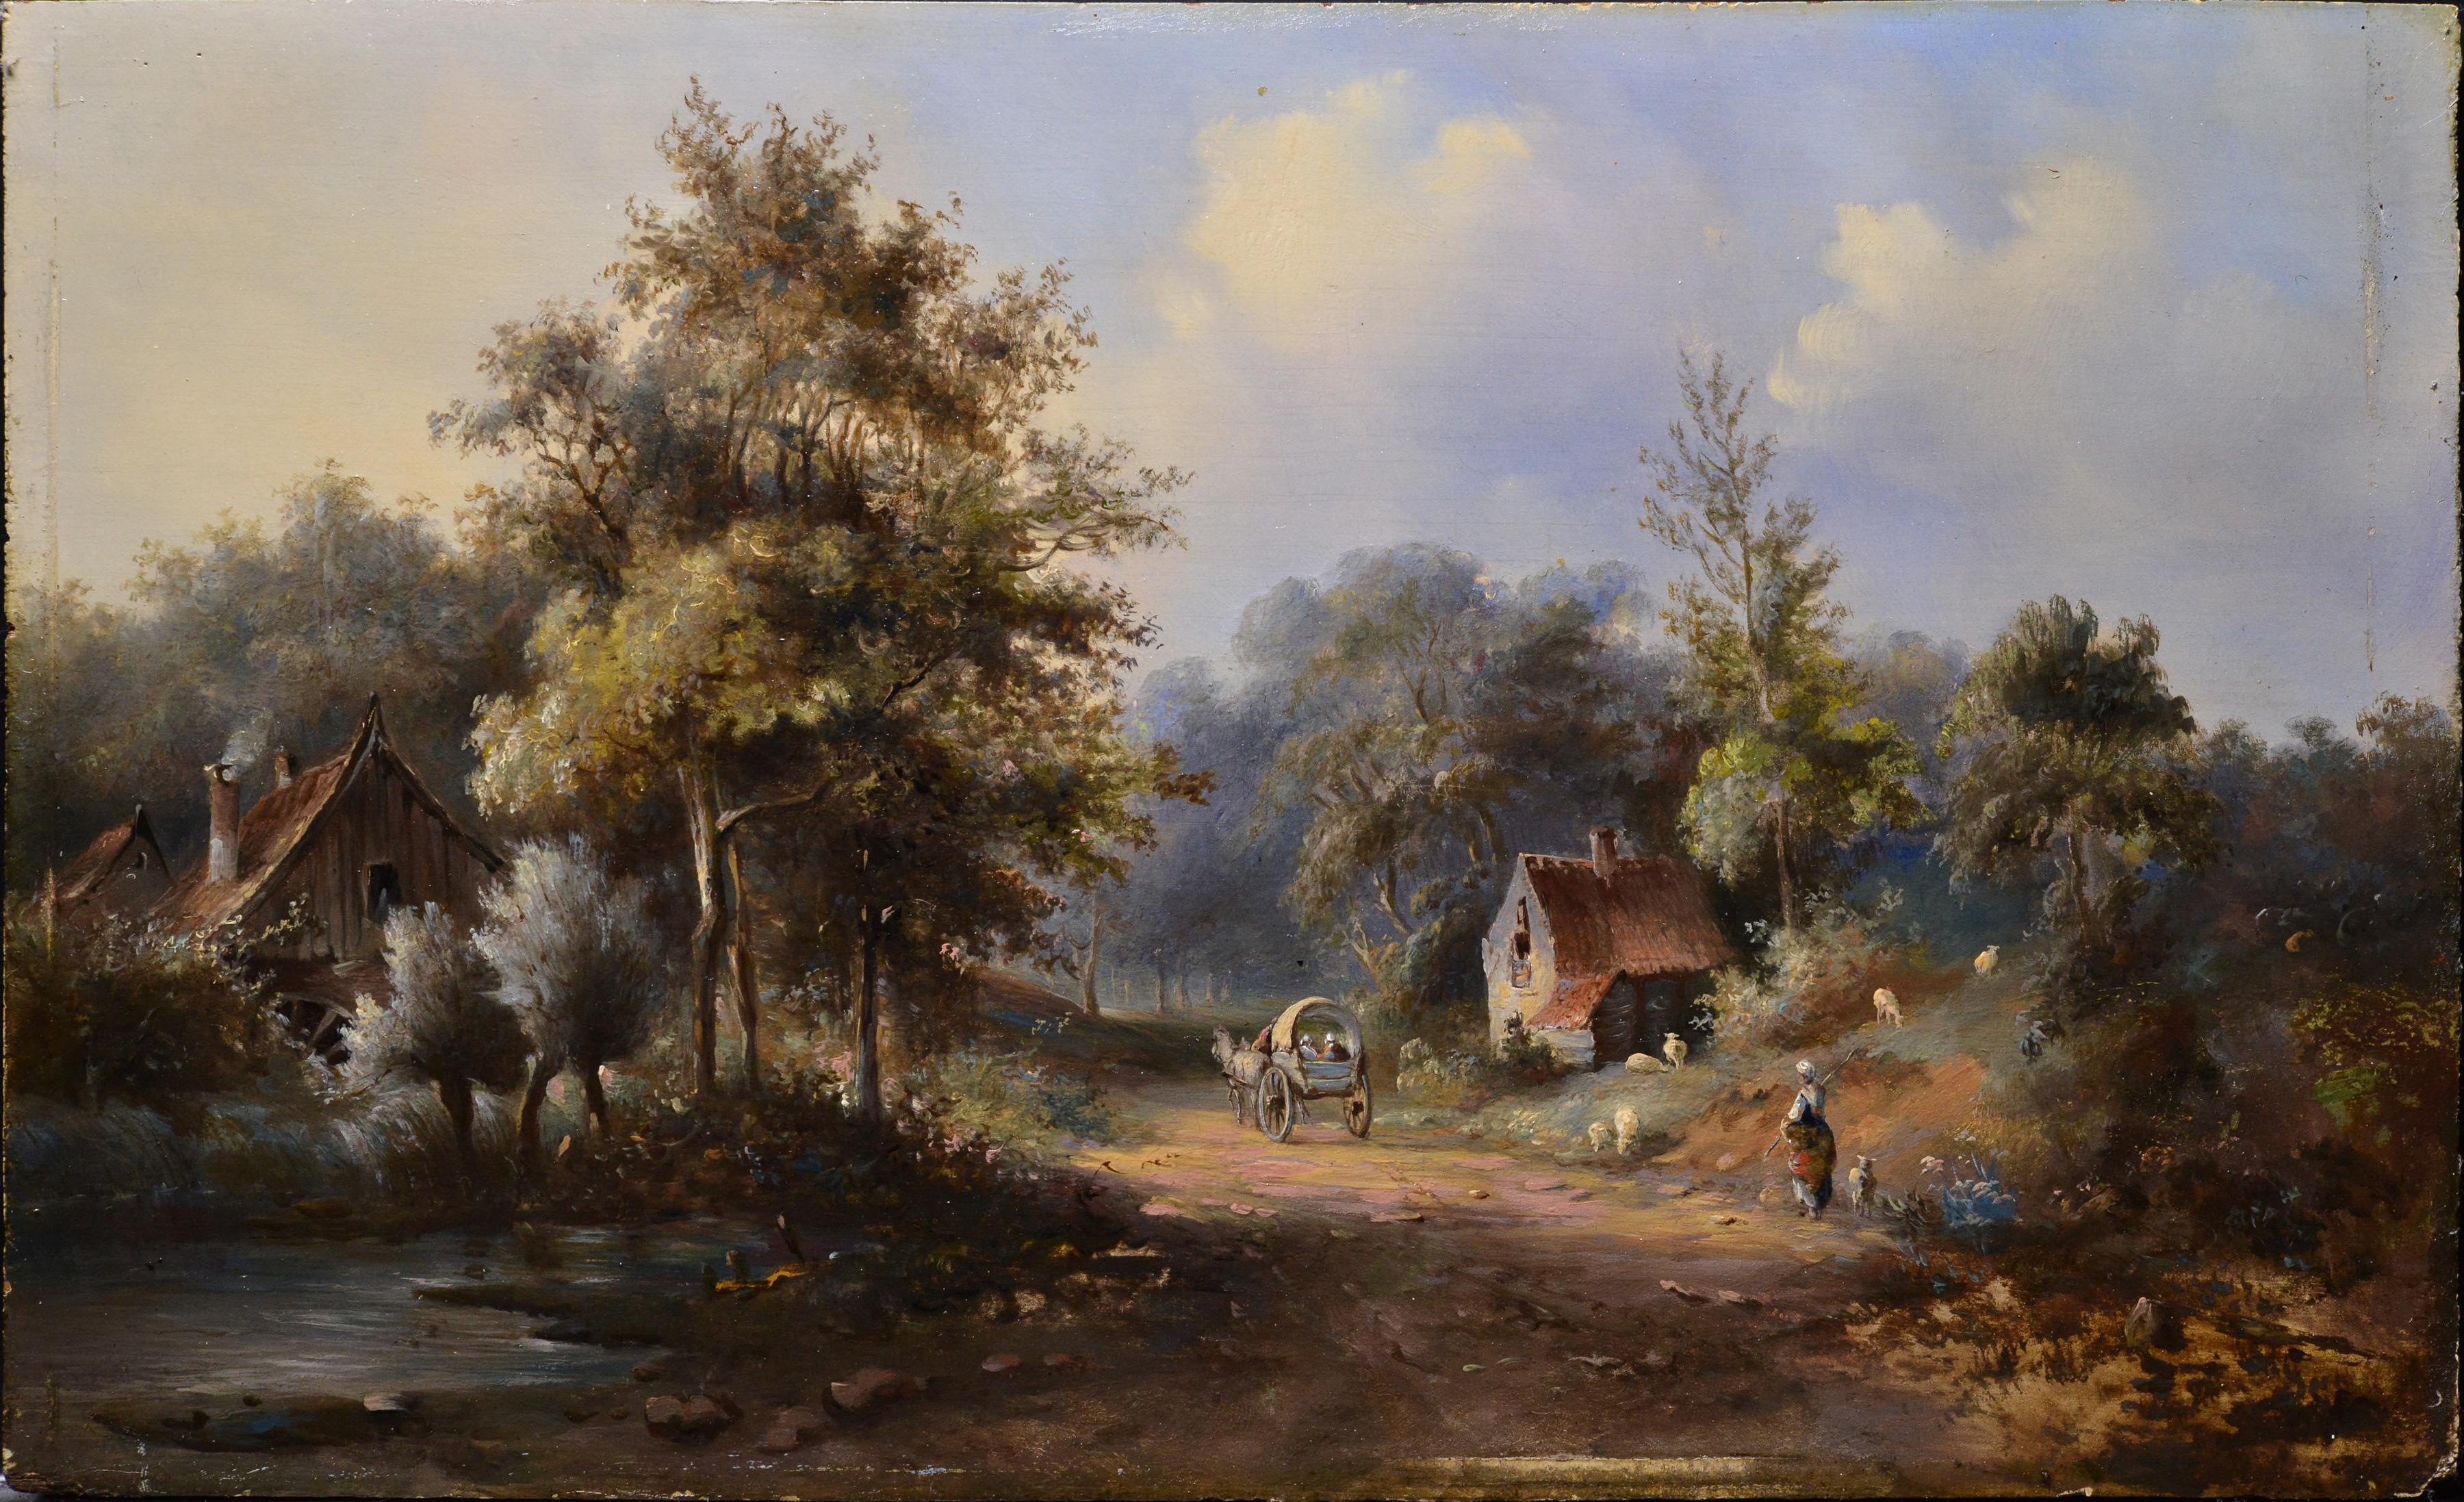 Brass plate leads to Russian artist Pavel Pavlovich Dzhogin (1834 - 1885). This 19th century oil painting beautifully captures a serene rural scene with travelers on a cart traveling along a forest road surrounded by beautiful and picturesque